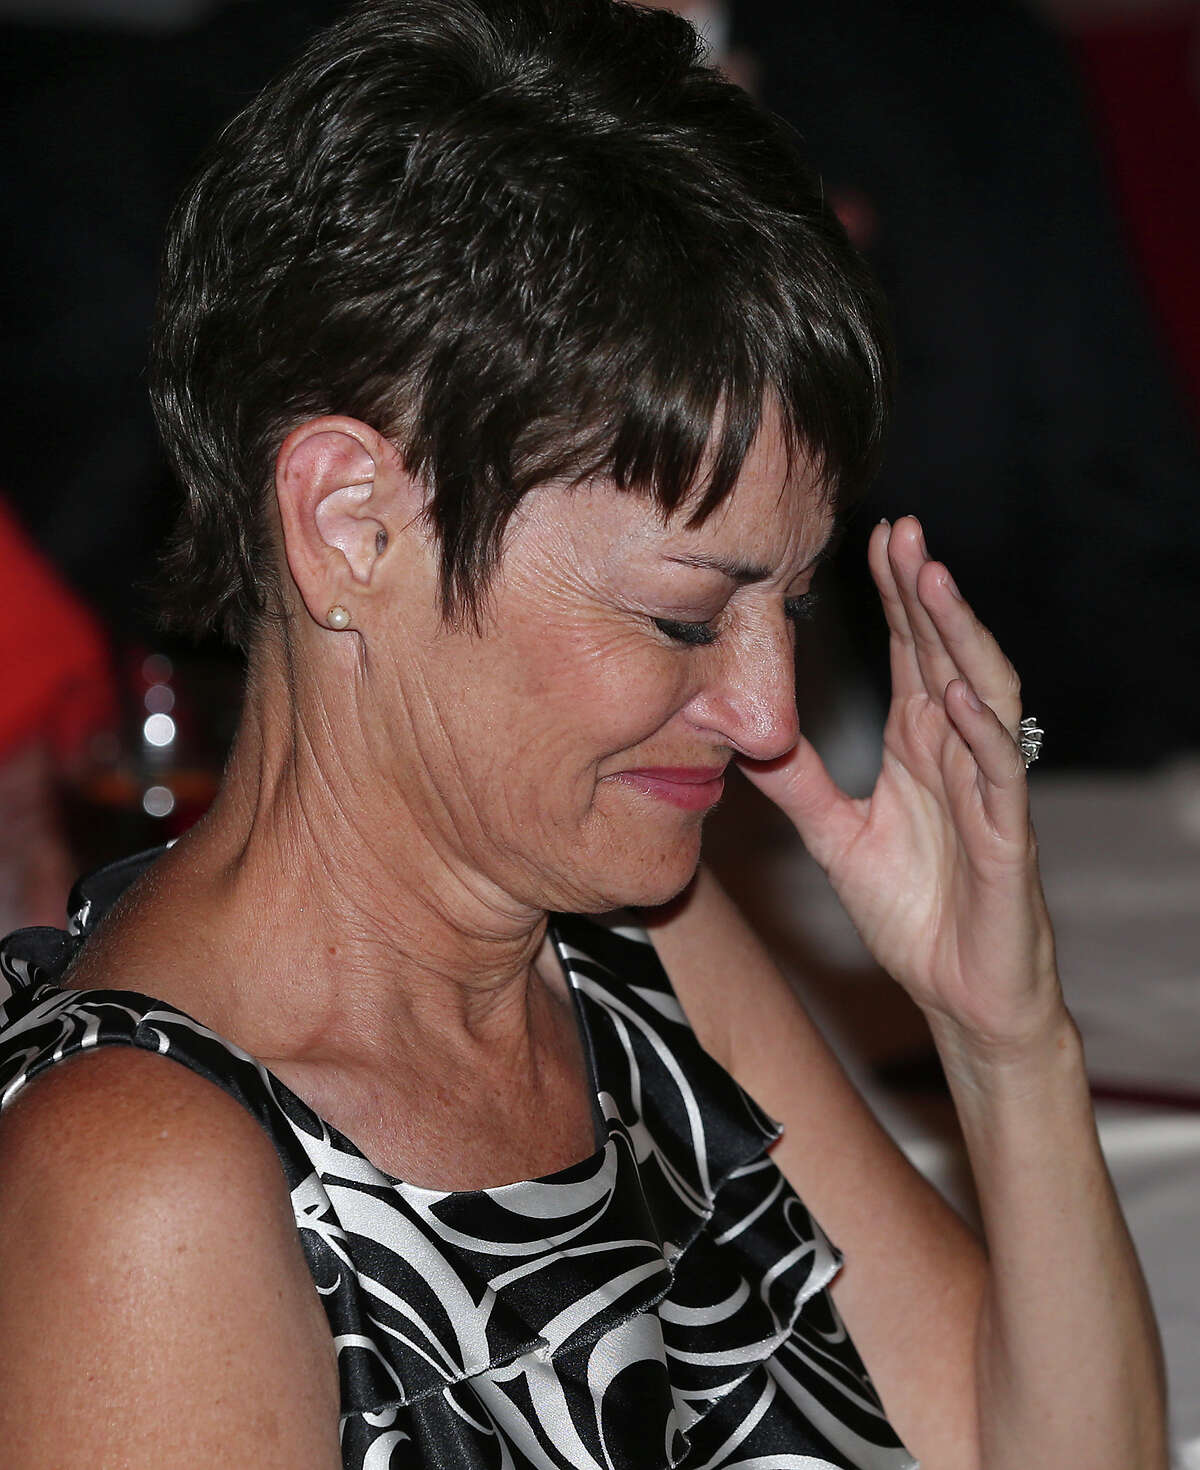 State Senator Donna Campbell grimaces at a response offered by Donald Trump during the GOP debate watch party at Maggiano's Little Italy on August 6, 2015.